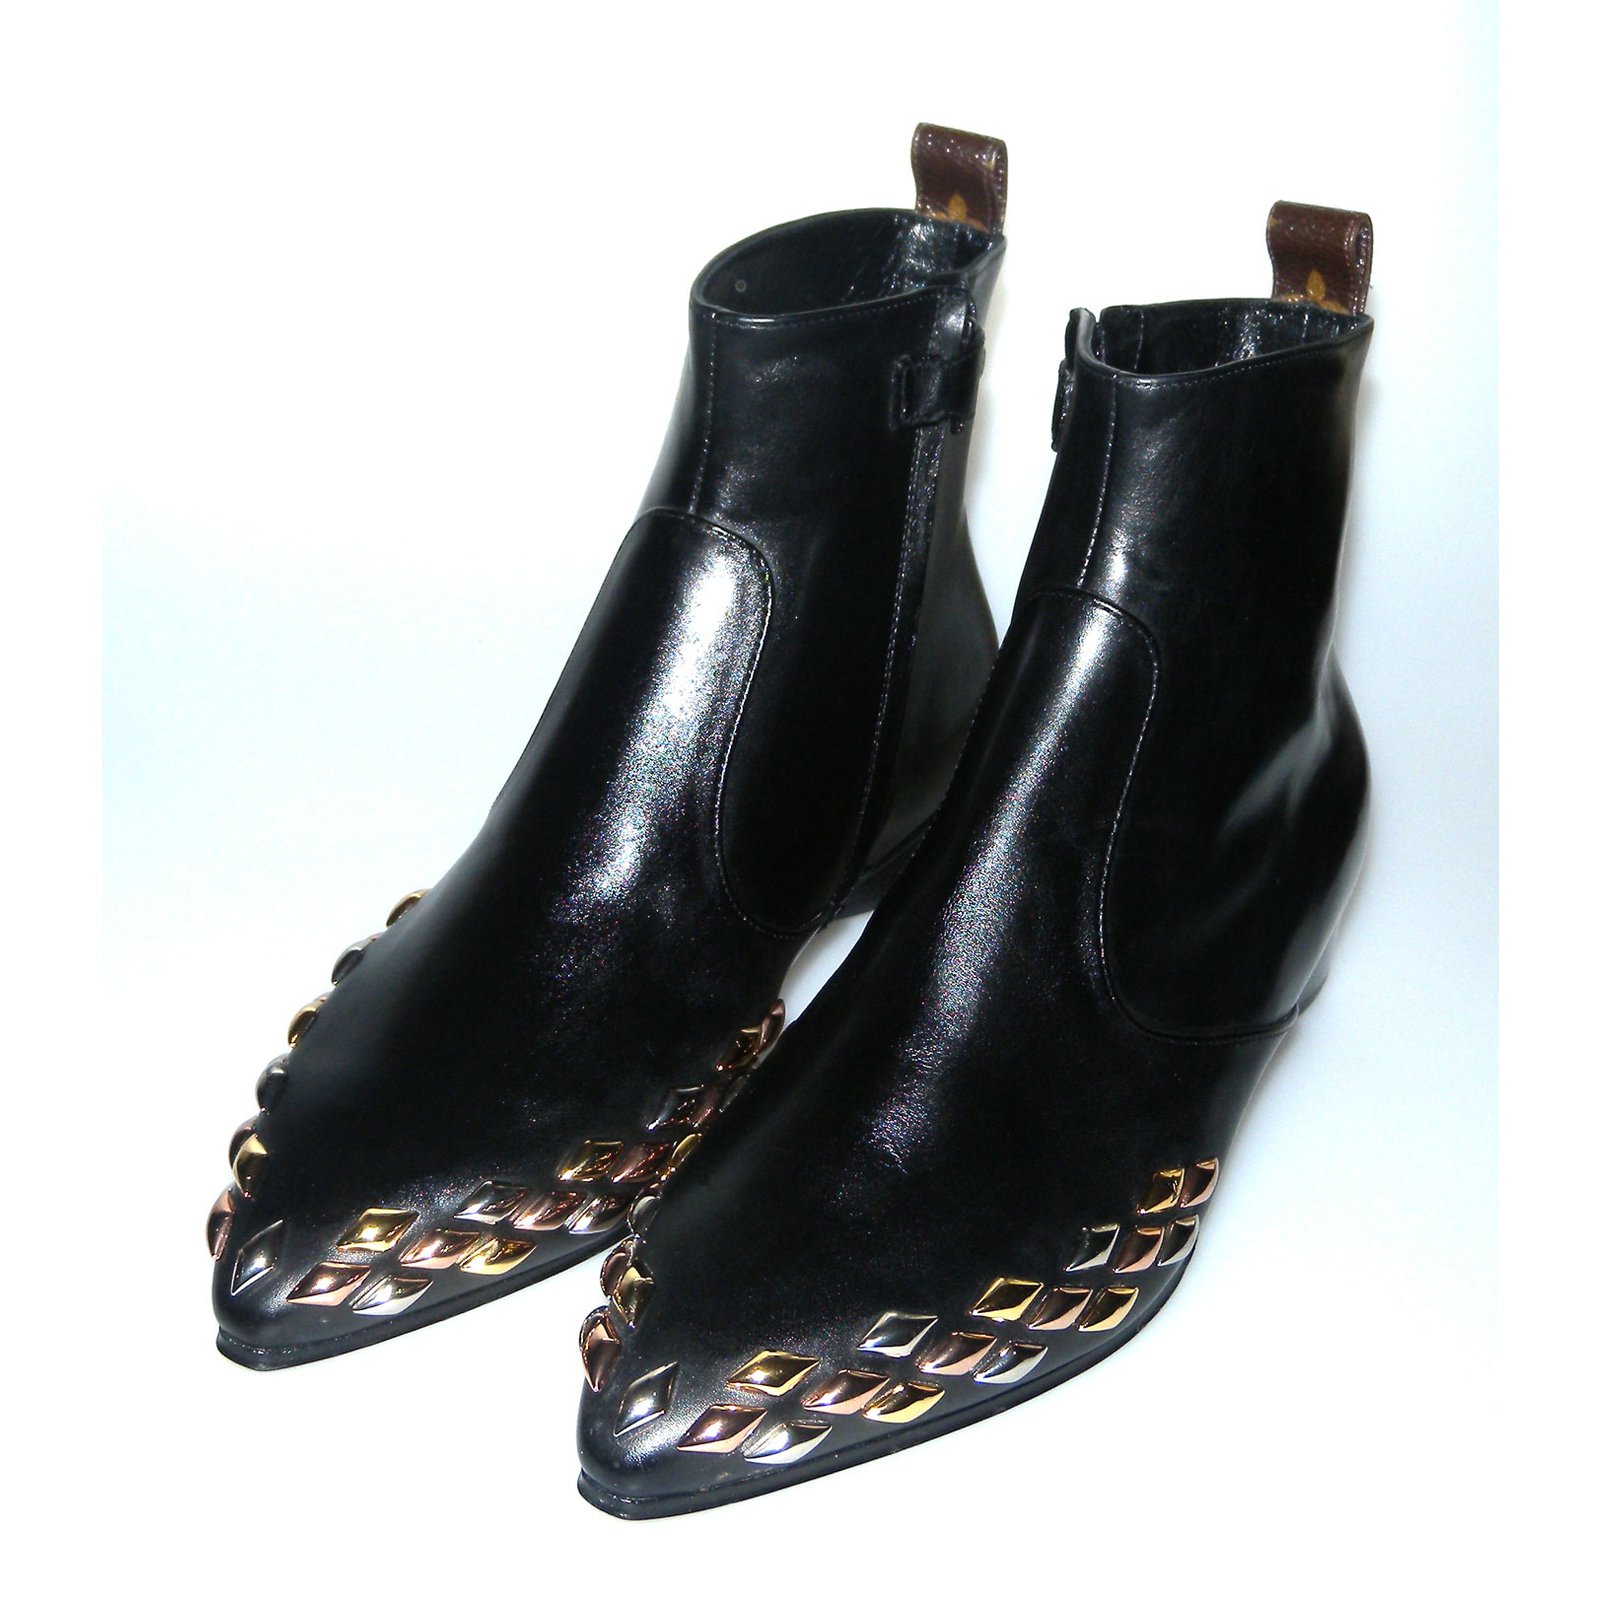 Louis Vuitton Bottine A Talon | Confederated Tribes of the Umatilla Indian Reservation